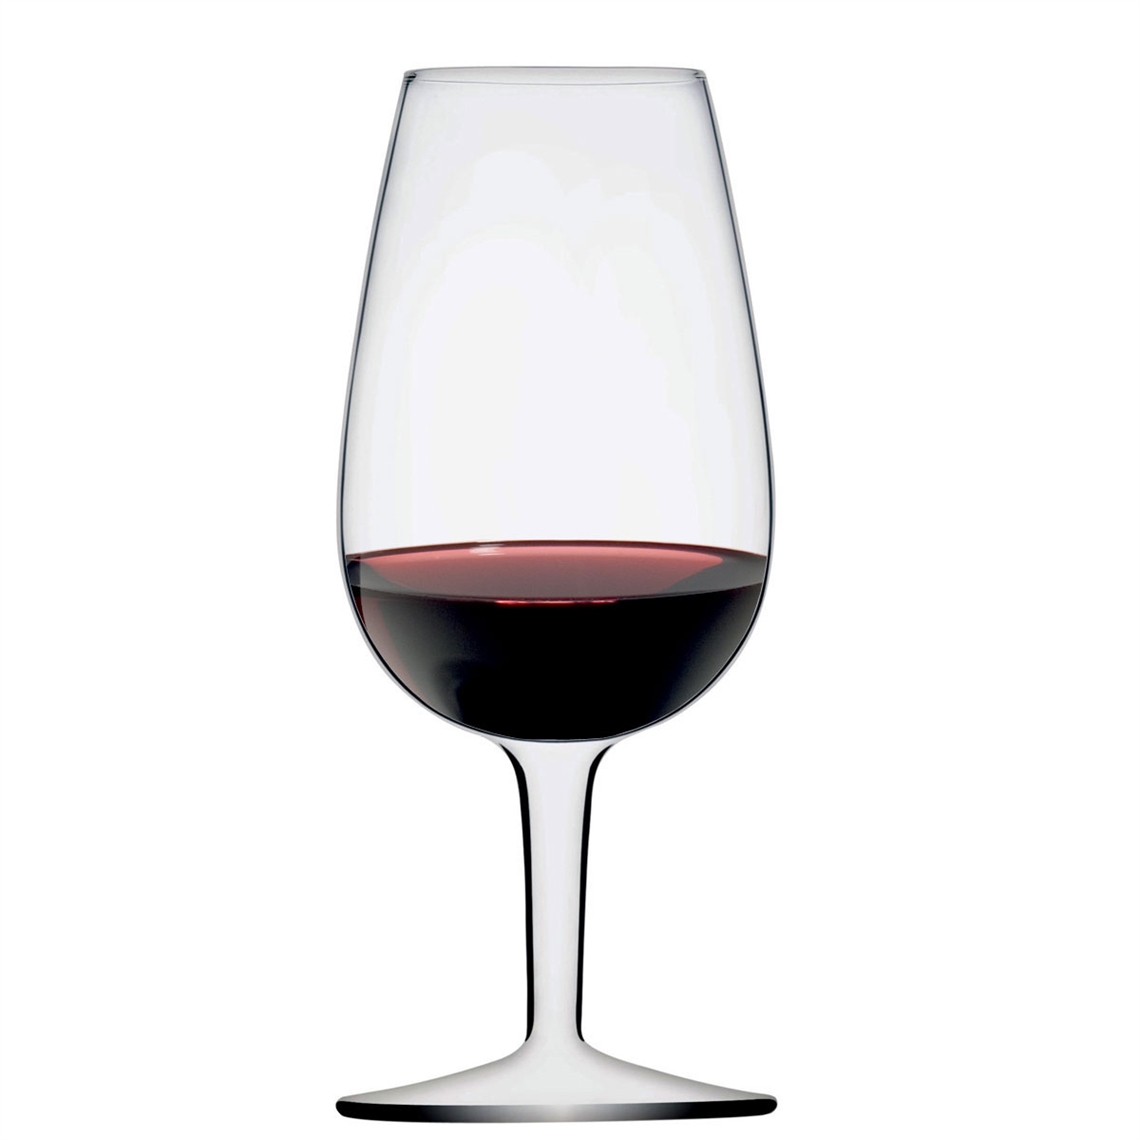 View more mark thomas from our Wine Tasting Glasses range